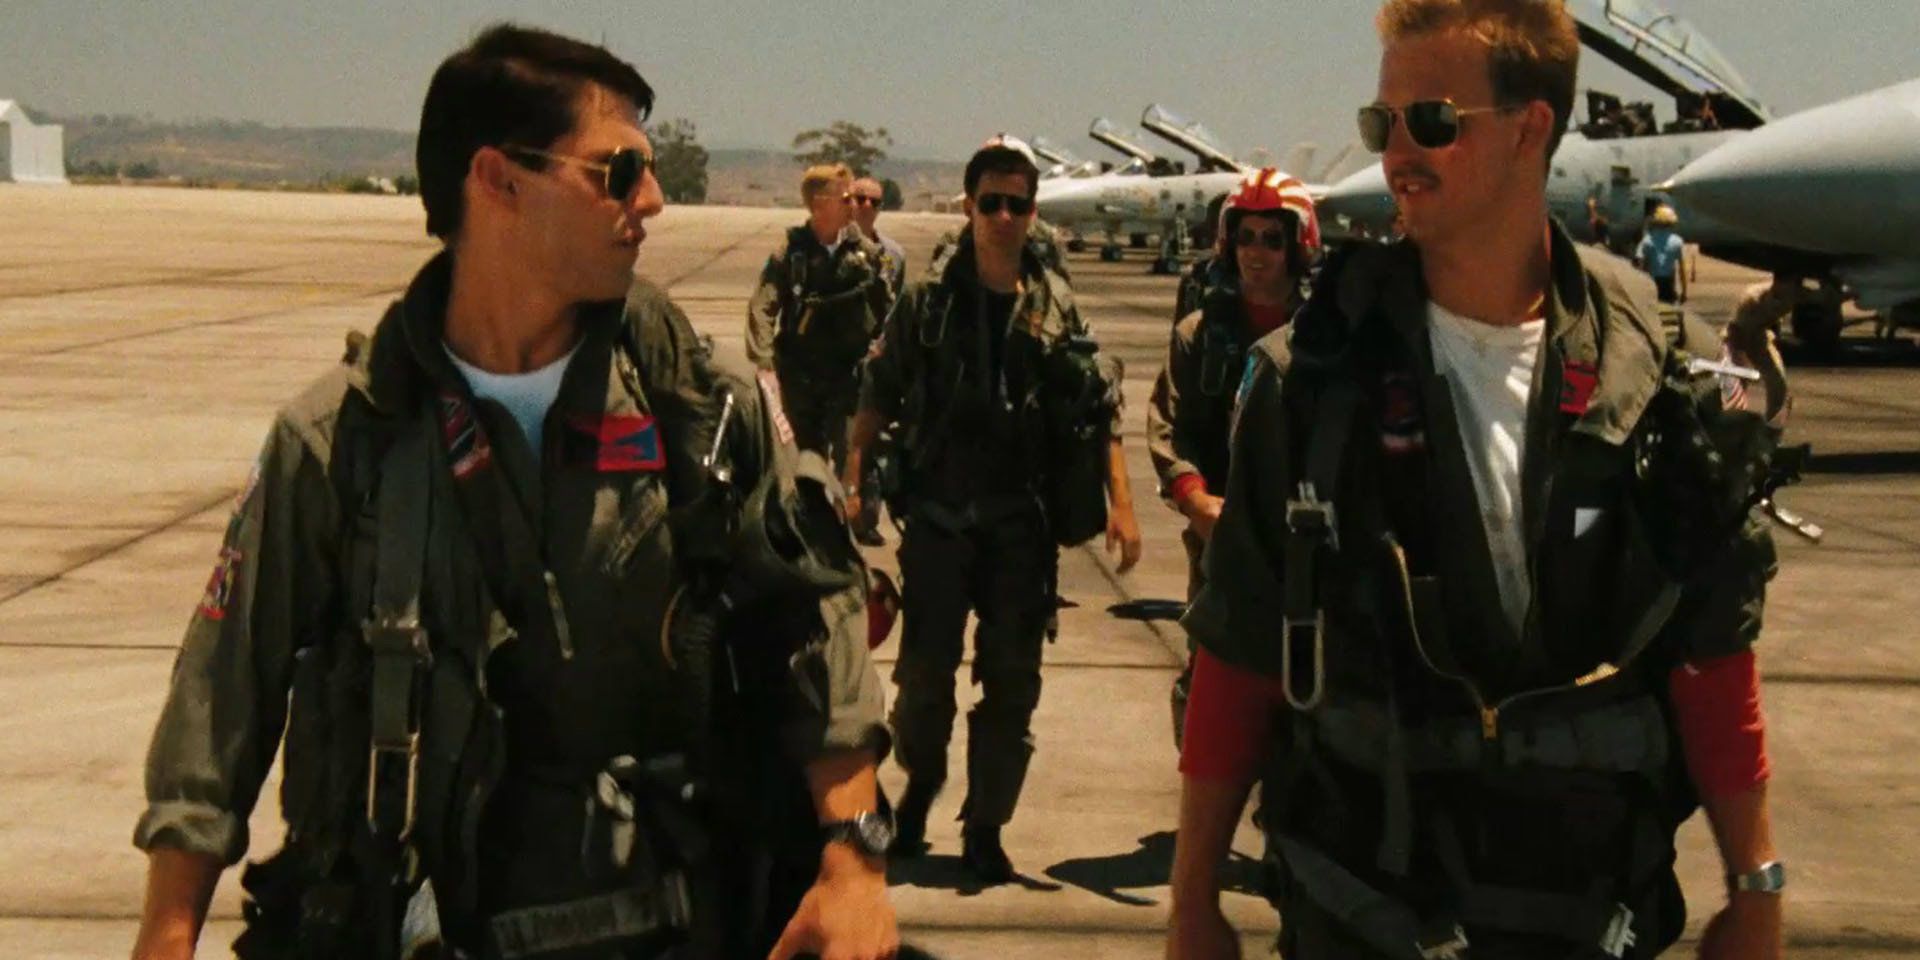 Maverick (Tom Cruise) talks to Goose (Anthony Edwards) as other pilots walk behind them in Top Gun.